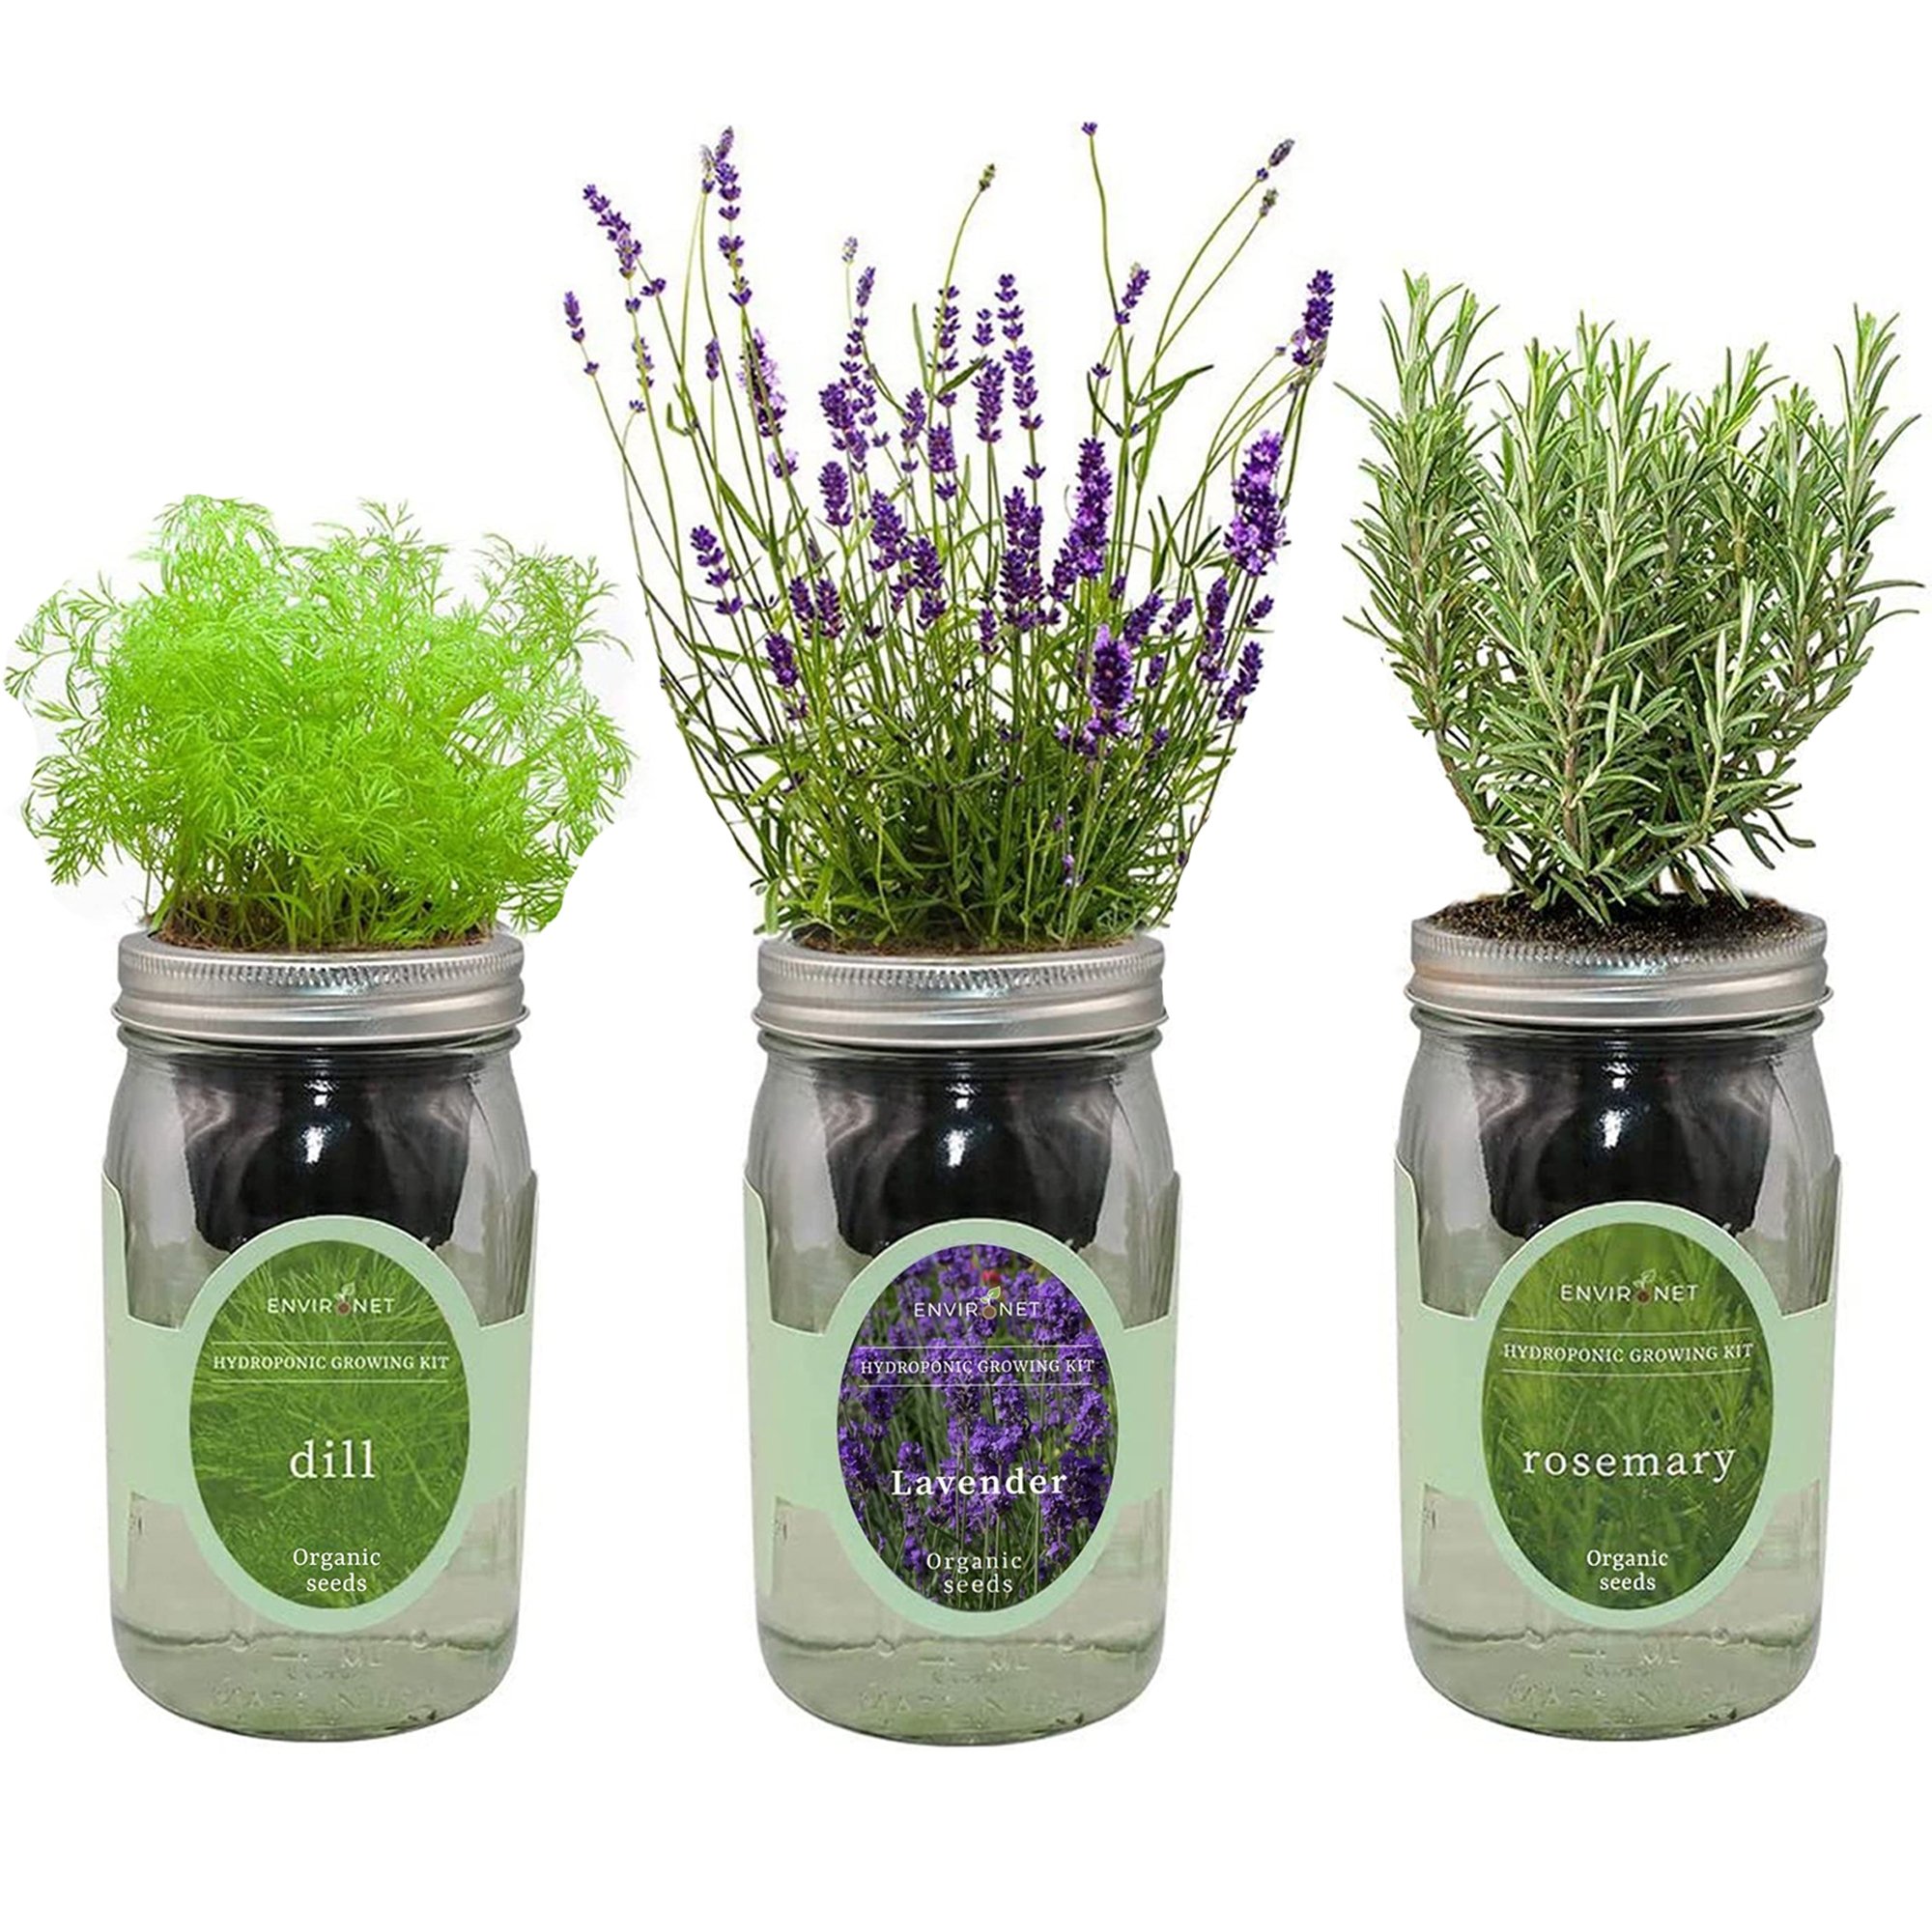 Hydroponic Herb Growing Kit Set with Organic Seeds - Dill, Lavender, Rosemary